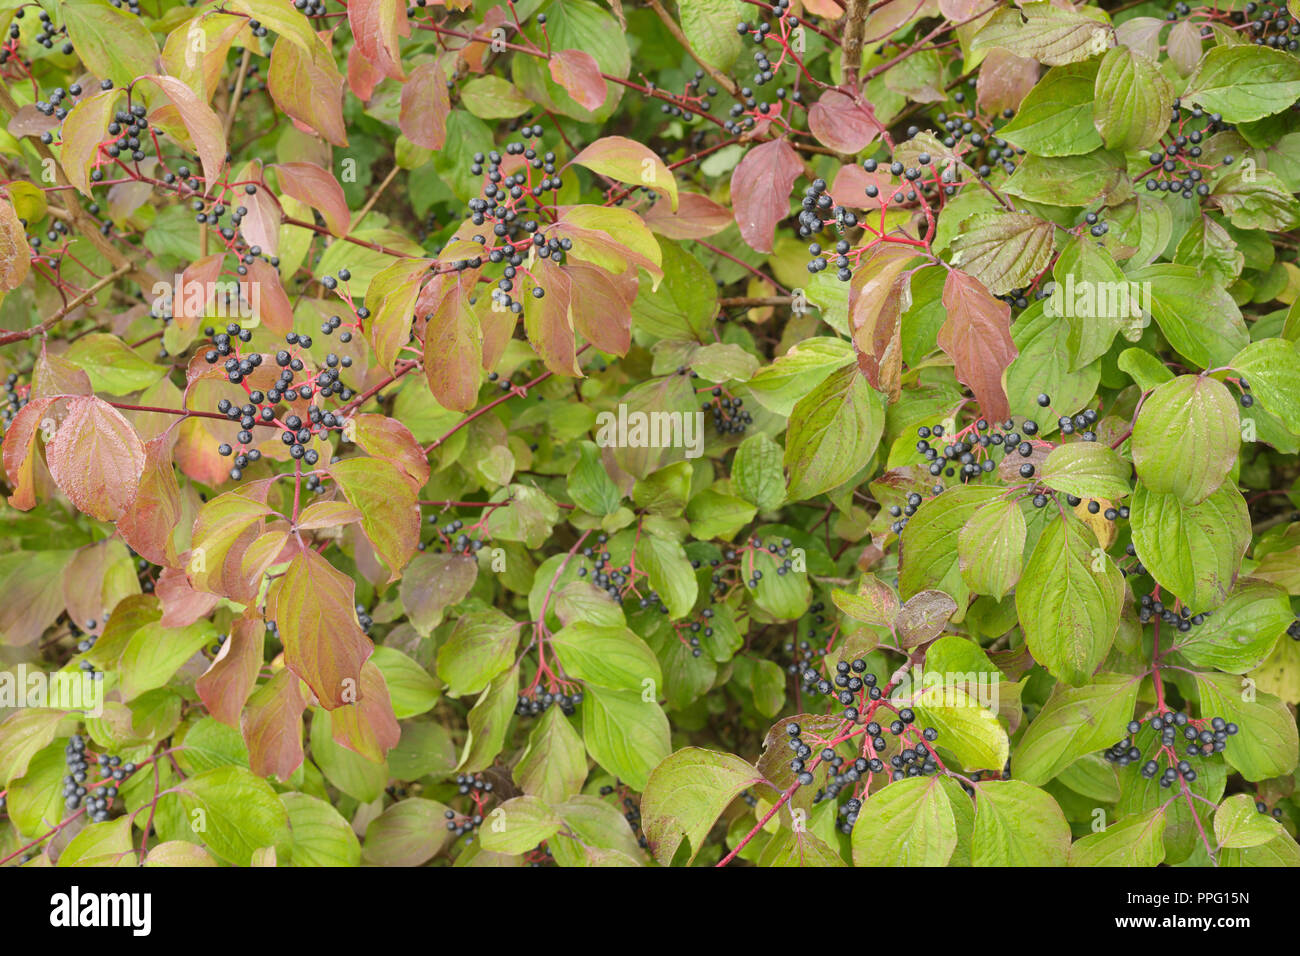 Common Dogwood (Cornus sanguinea)  fruits and leaves in autumn colour, growing in hedgerow, West Yorkshire, England, September Stock Photo